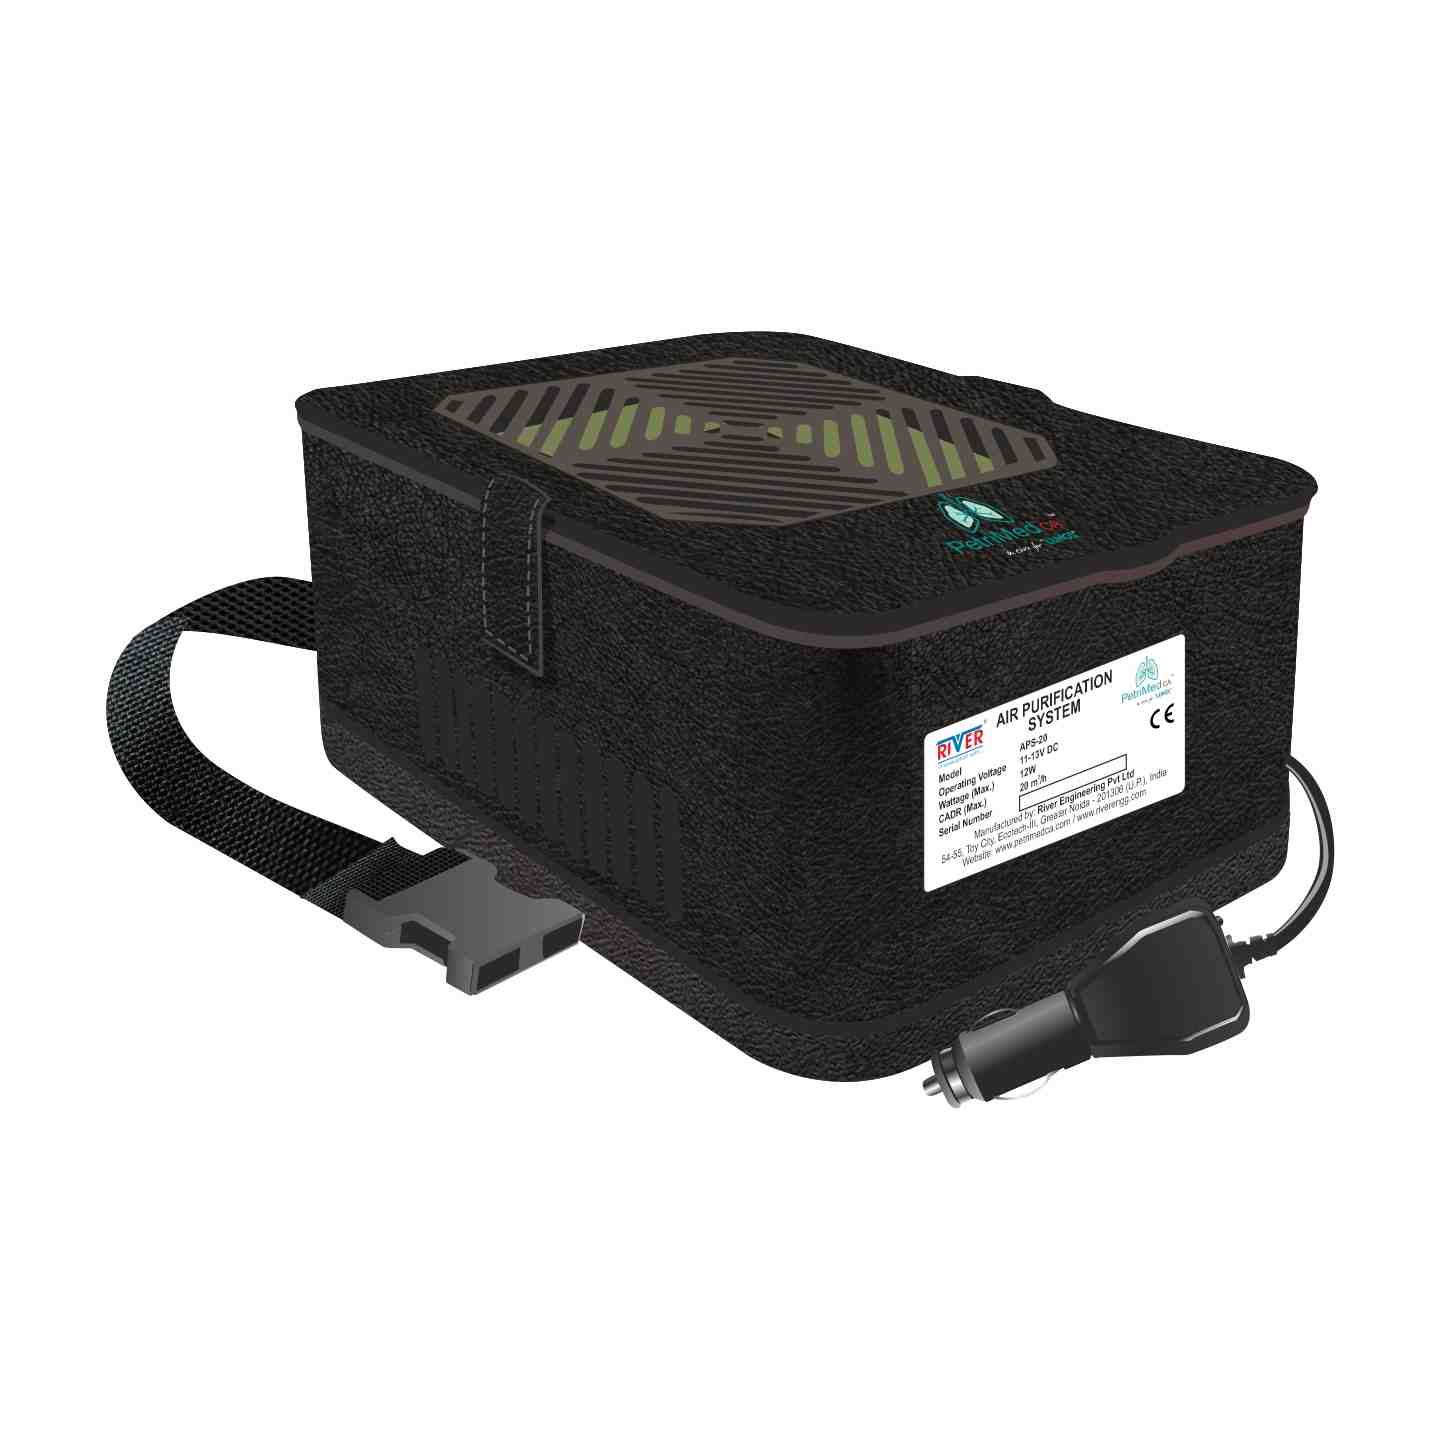 APS-20 Automobile Air Purification System for Car